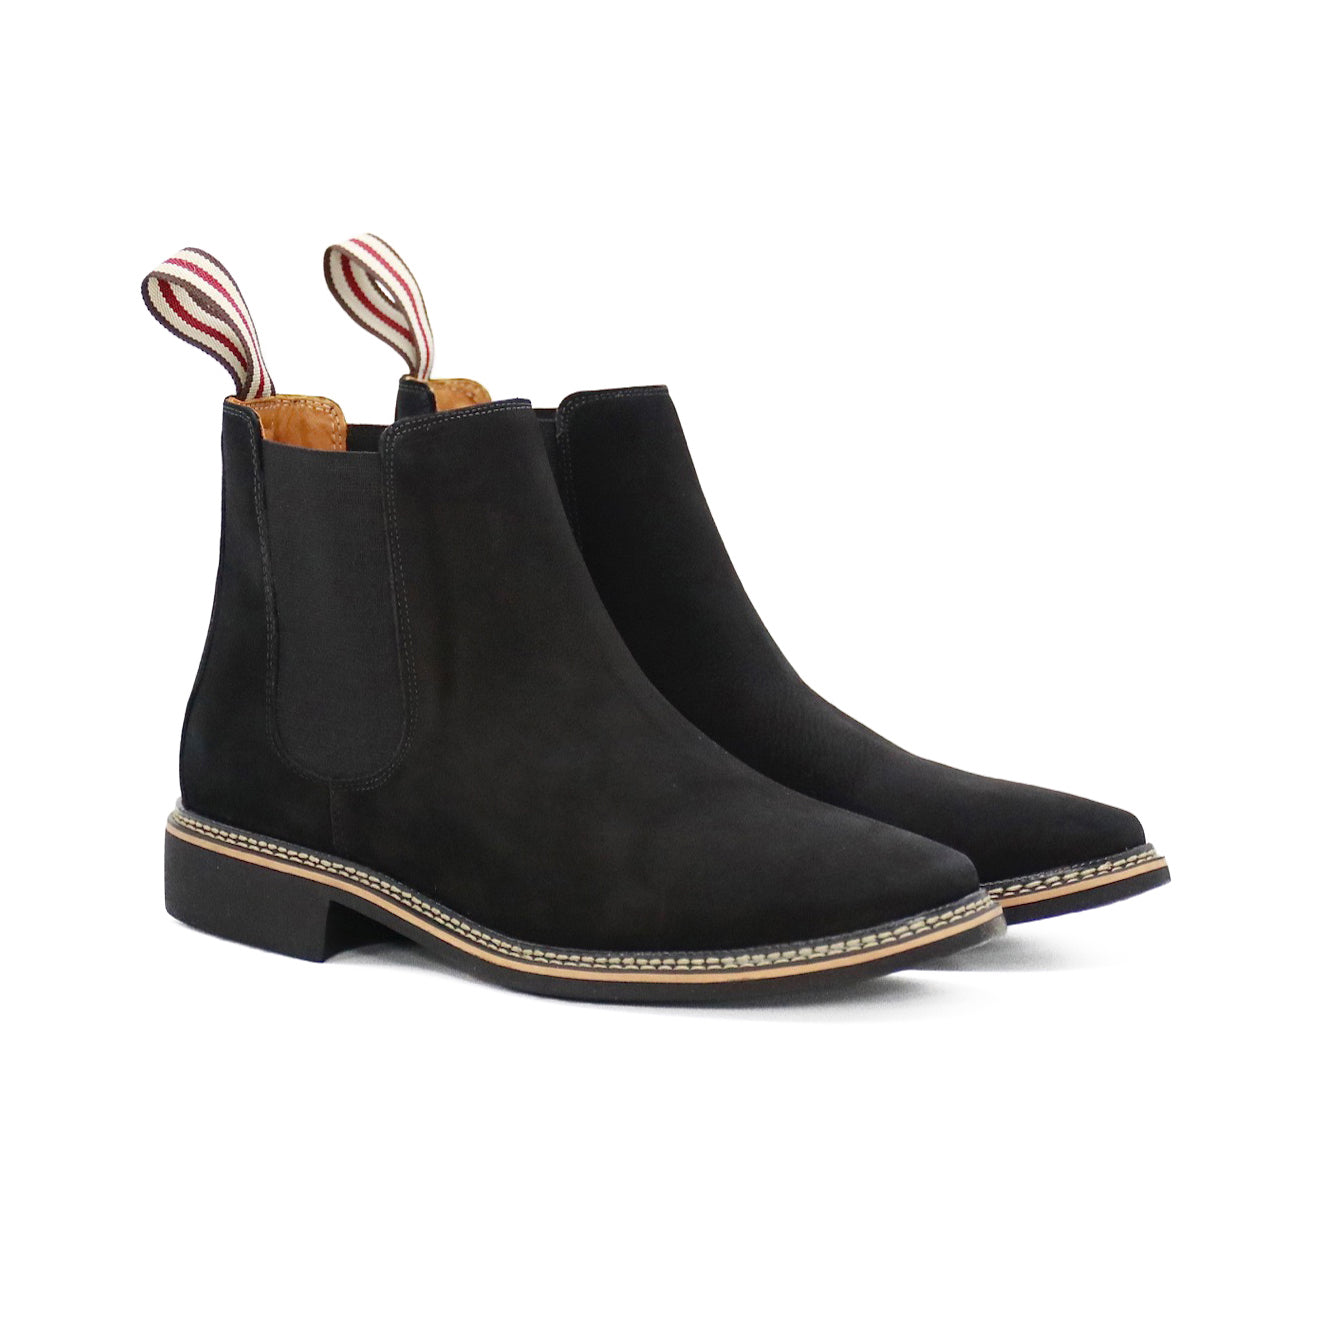 chelsea boots for kids